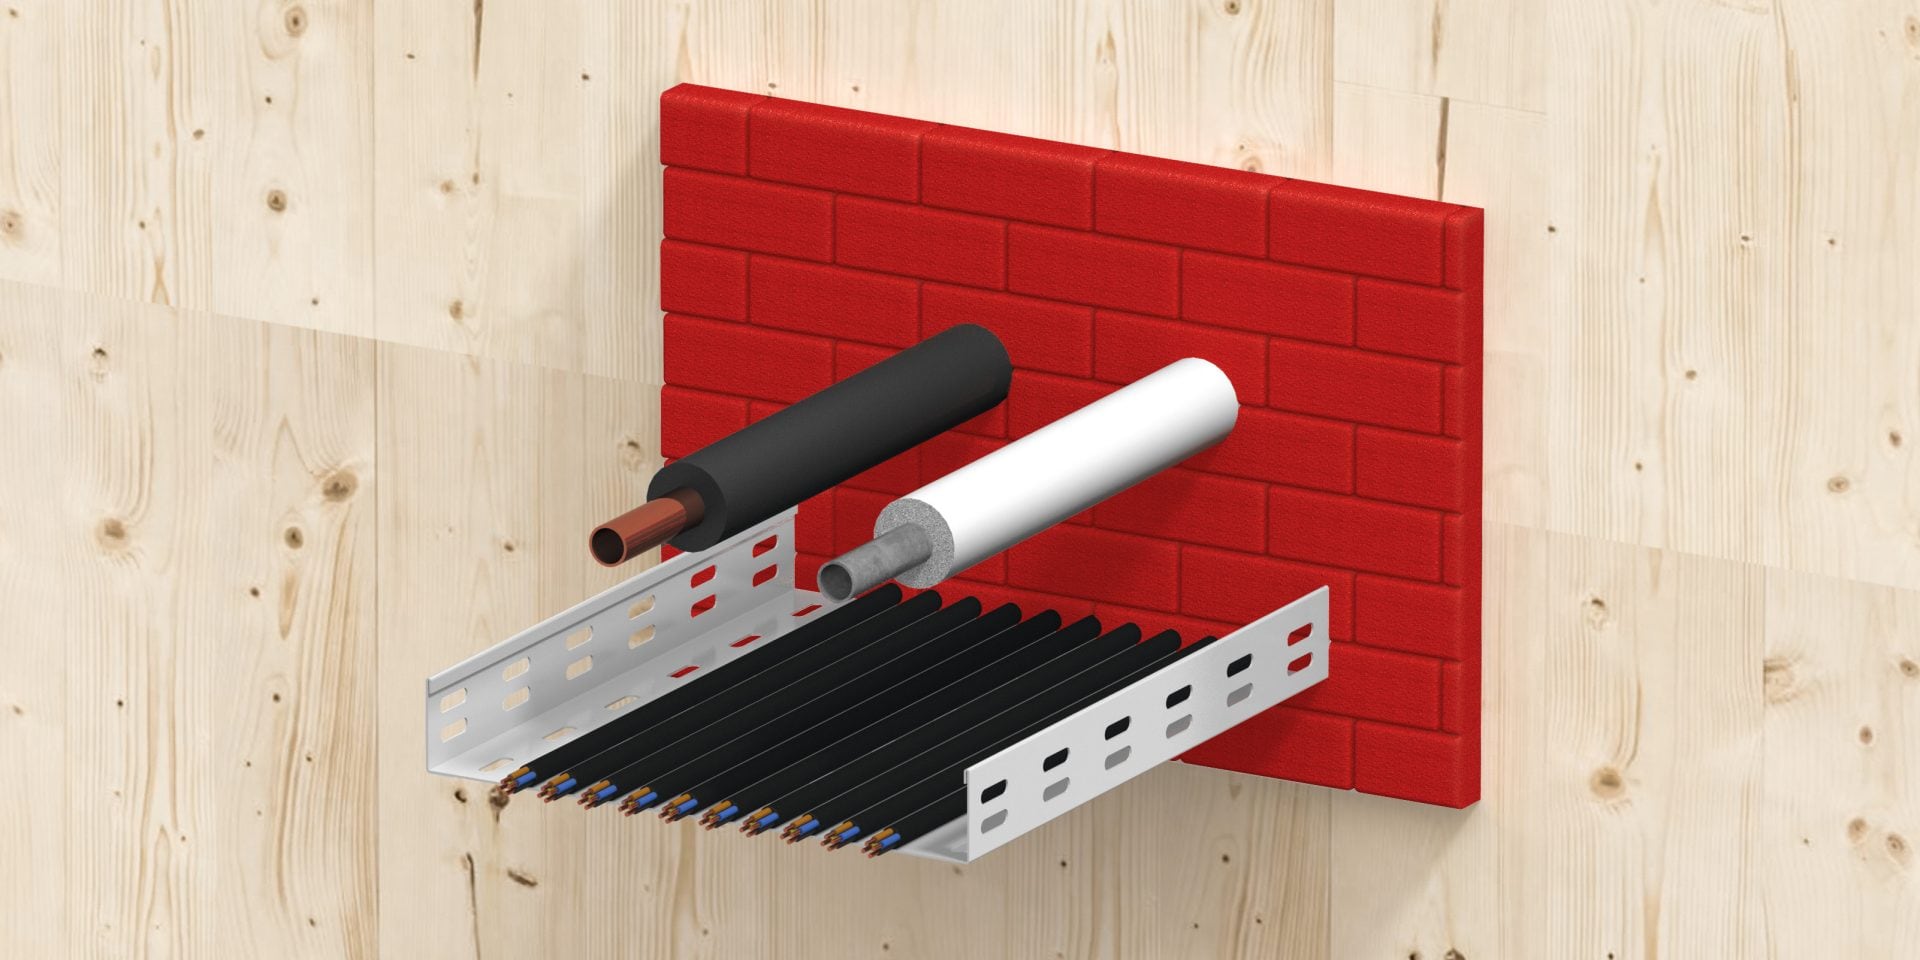 3D rendering of a cross-section of a wooded ceiling showing a CFS-BL P Firestop block around pipes,  cables and a cable tray (mixed penetrations)